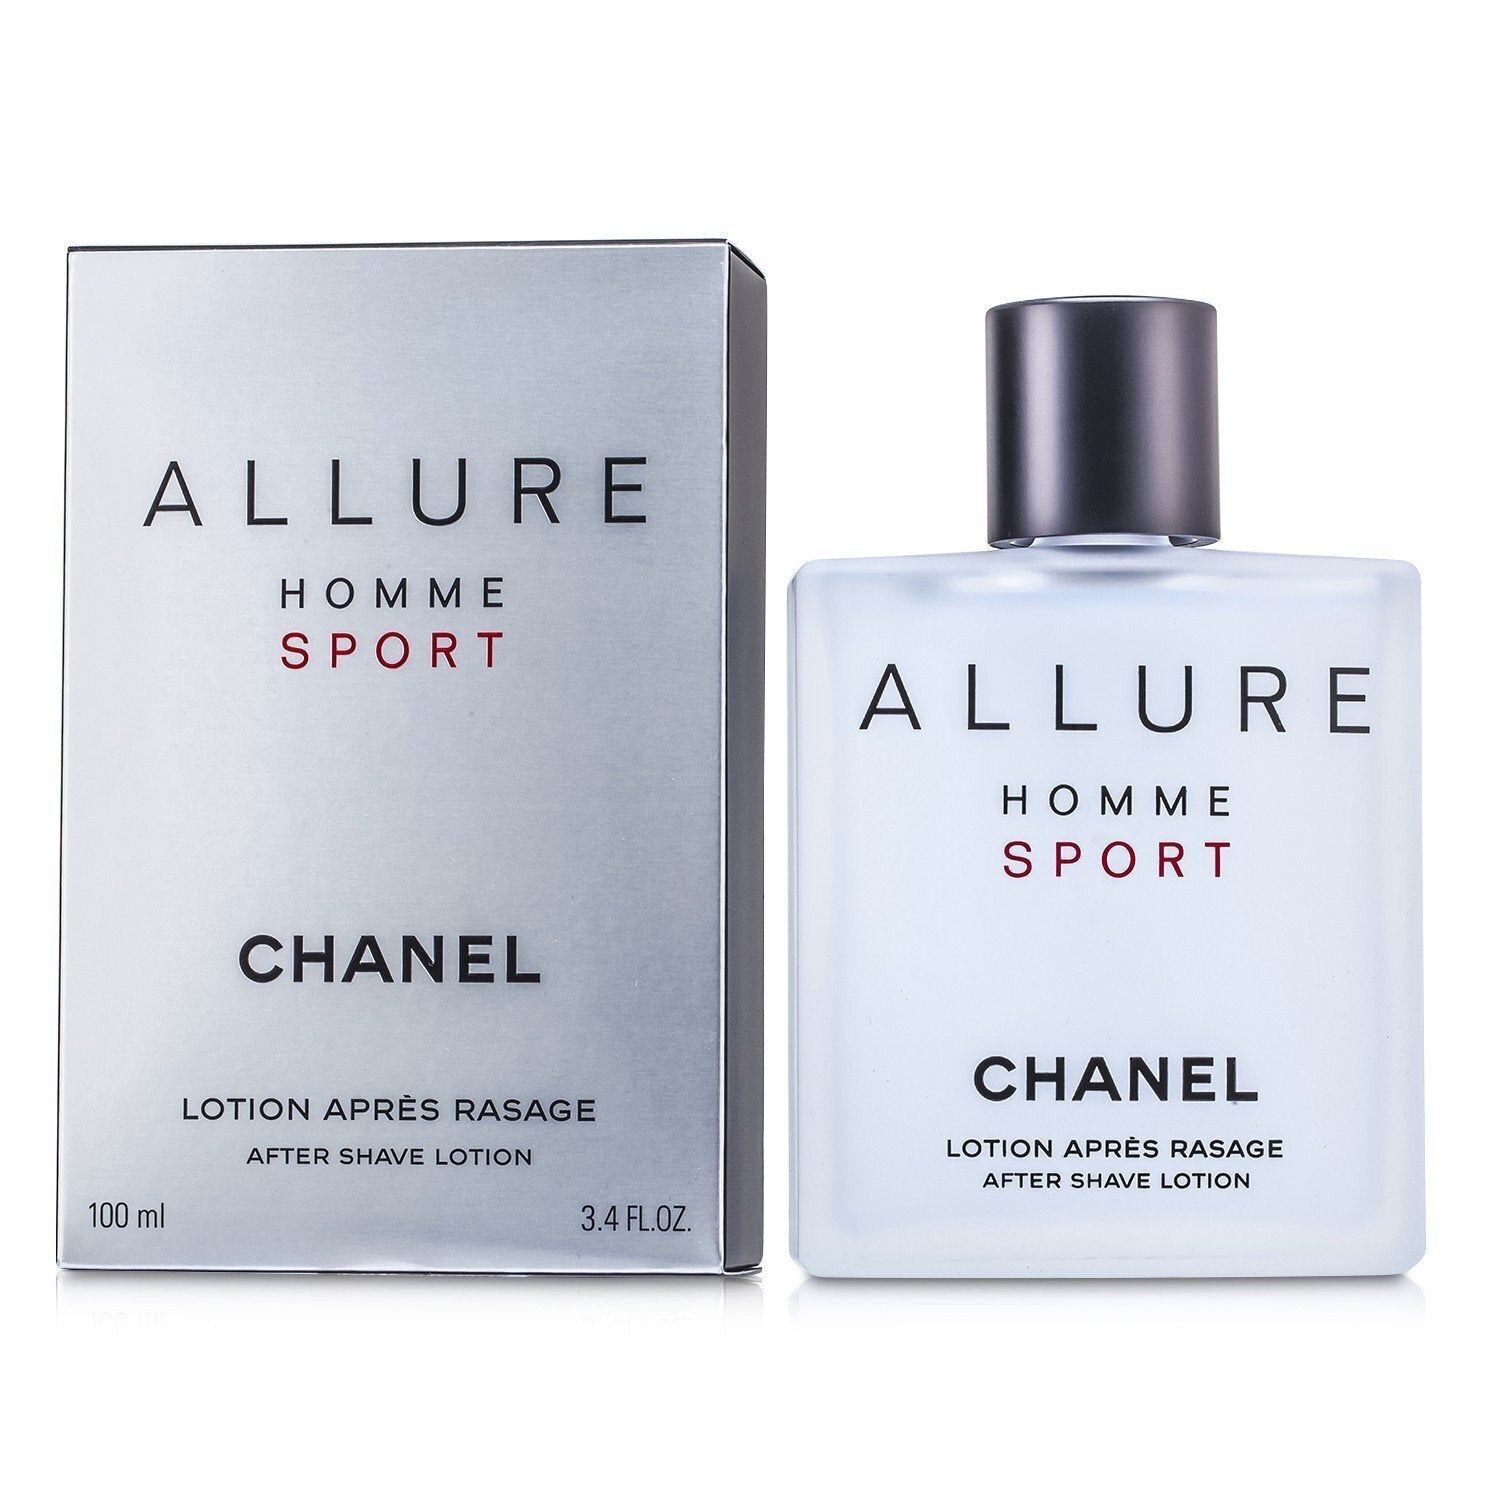 CHANEL ALLURE HOMME SPORT AFTER SHAVE LOTION 3.4oz. NEW IN SEALED